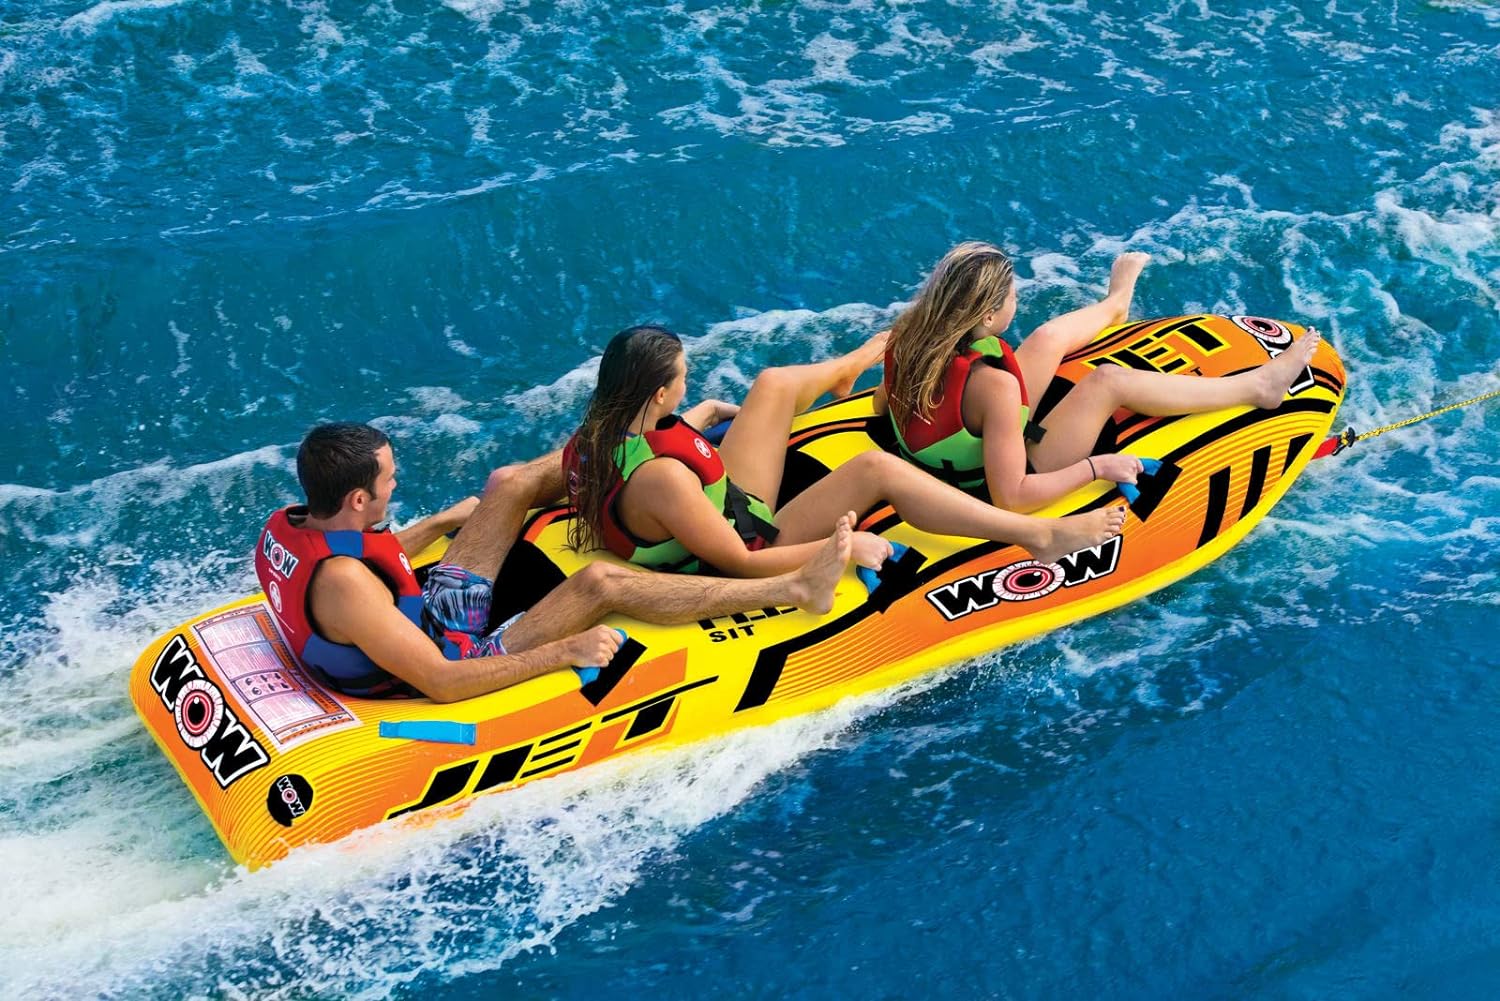 WoW World of Watersports, Jet Boat Towable